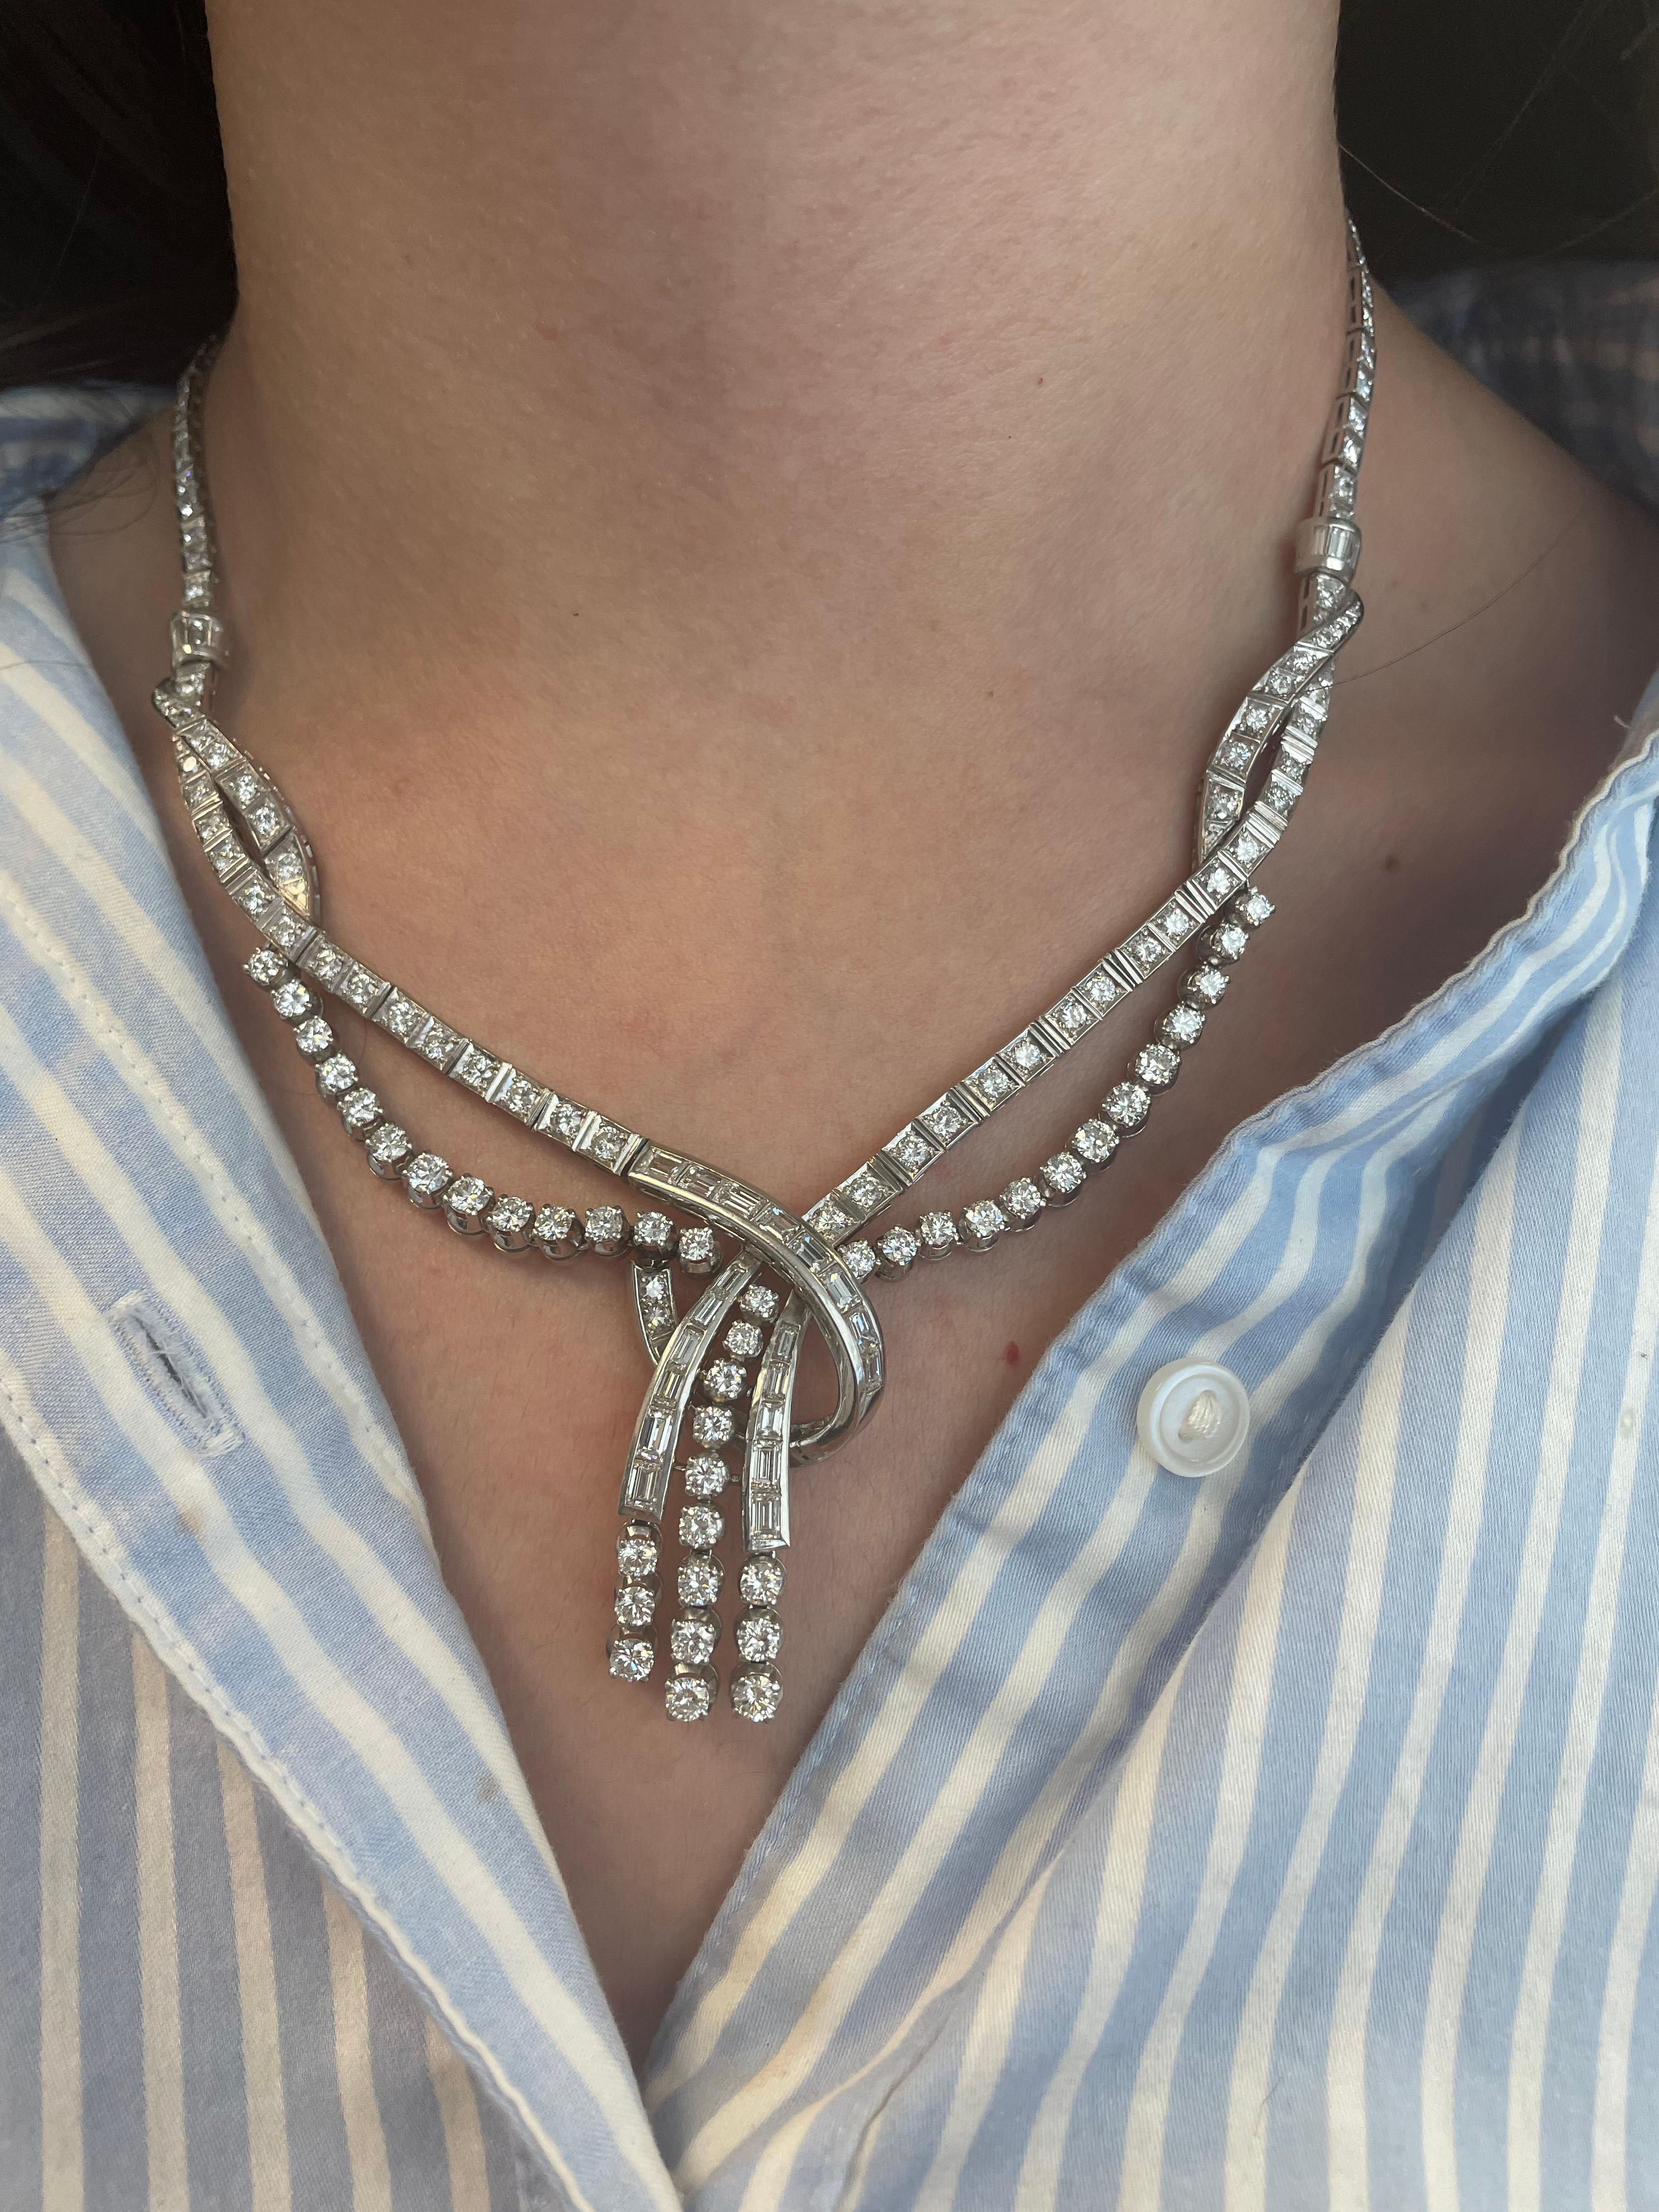 Grand statement lay-over diamonds high jewelry necklace.
Approximately 18.80 carats of round brilliant and baguette cut diamonds, approximately G/H color and VS clarity. Platinum, 16 inches.
Accommodated with an up-to-date appraisal by a GIA G.G.